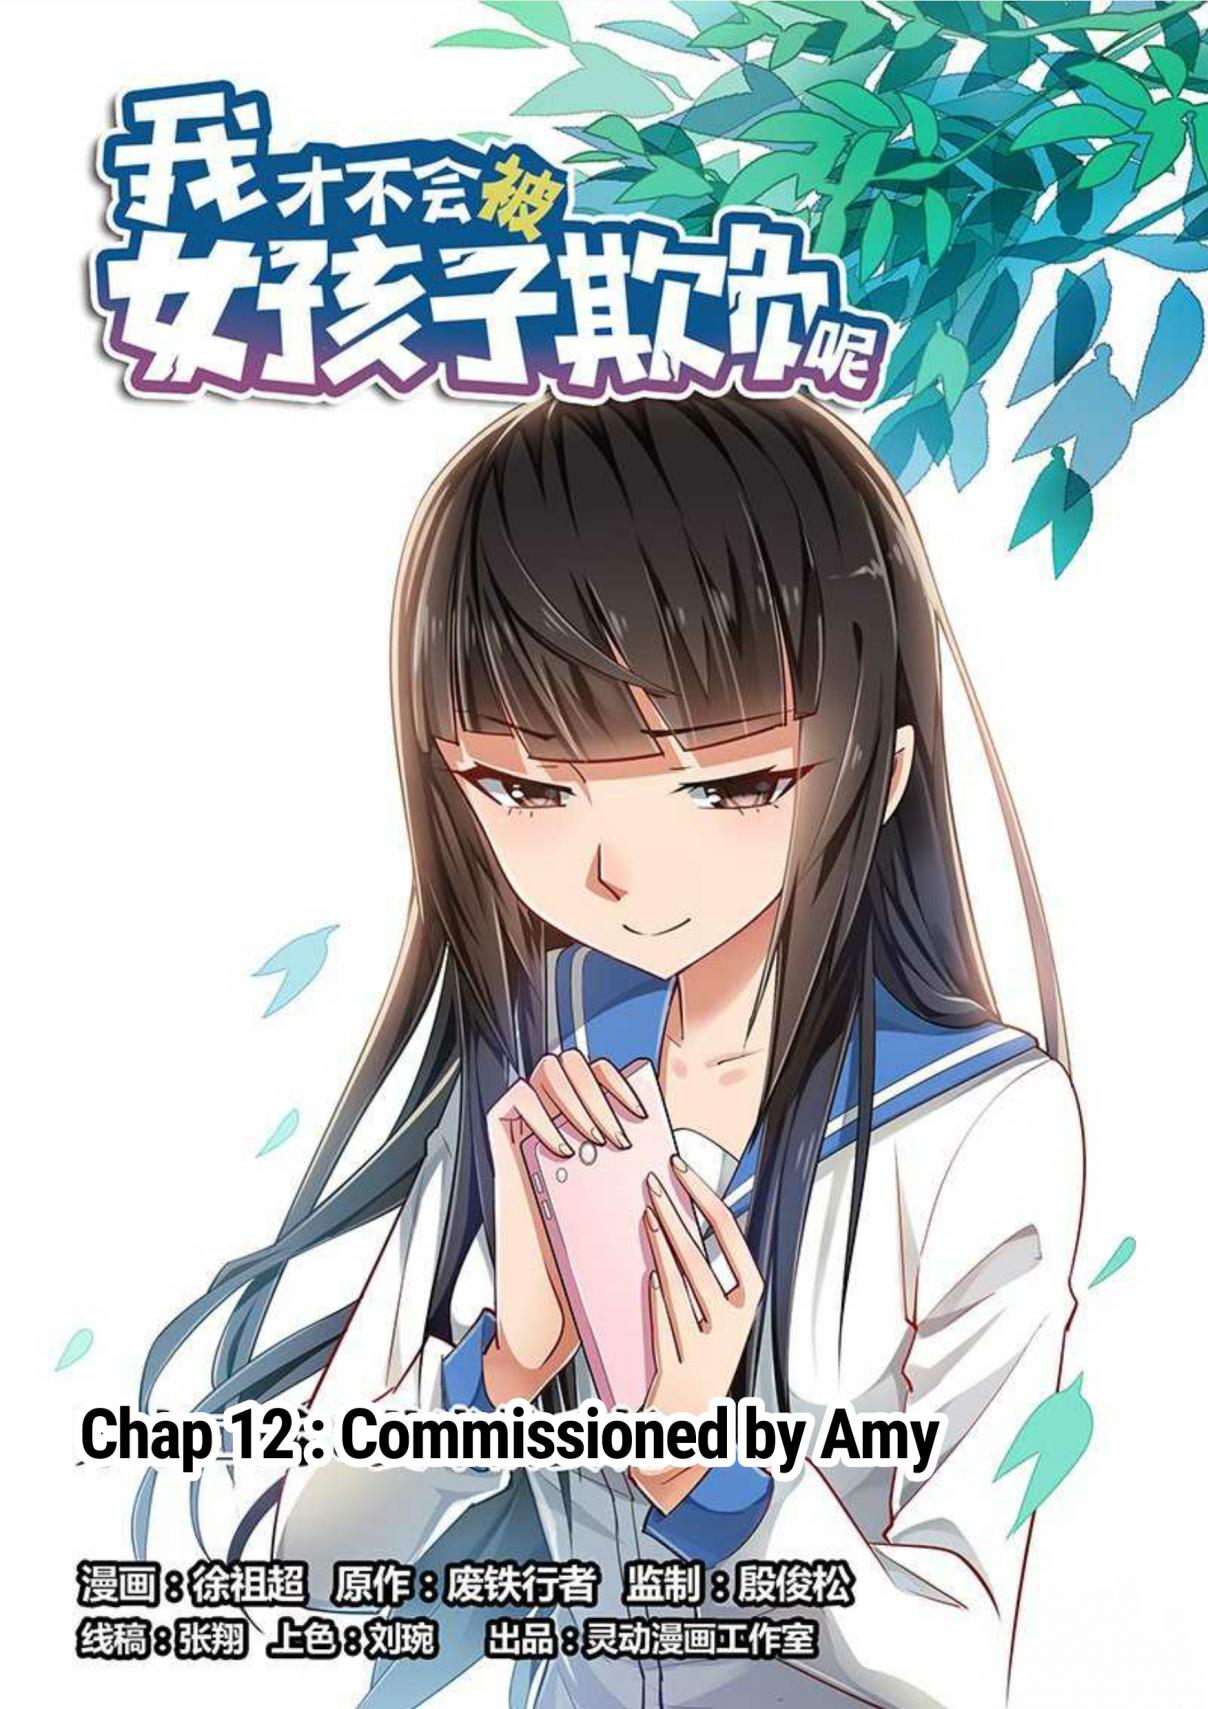 I Don't Want to Be Bullied By Girls Ch. 12 Commissioned by Amy